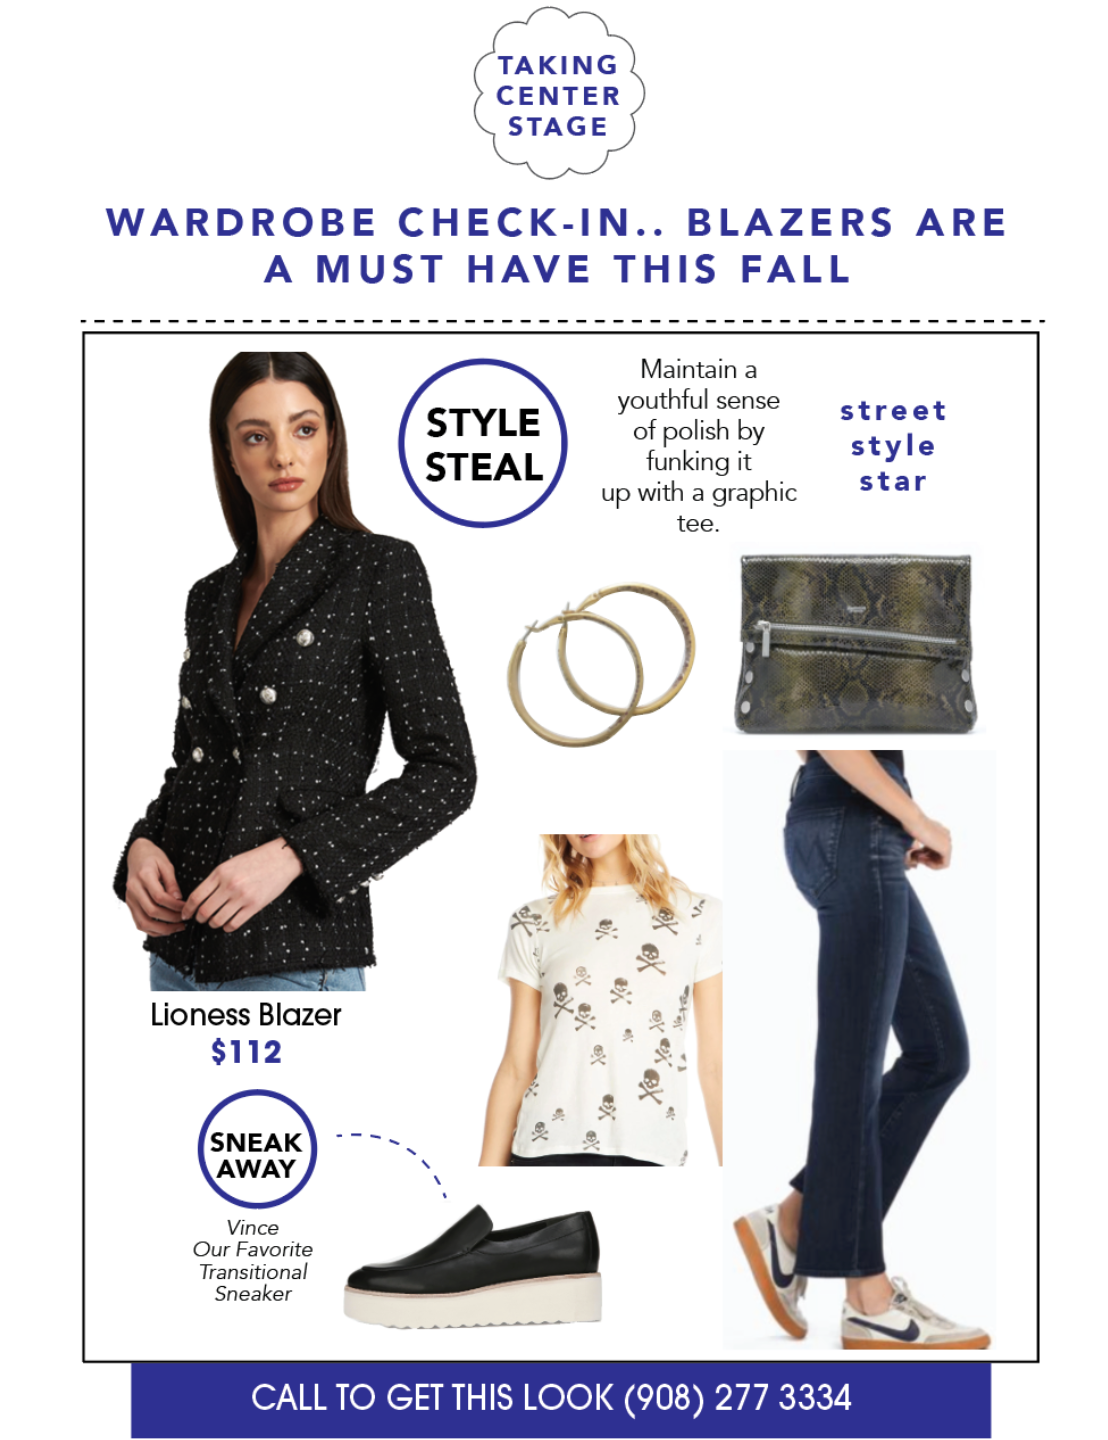 Wardrobe Check-In : Blazers Are a Must for Fall